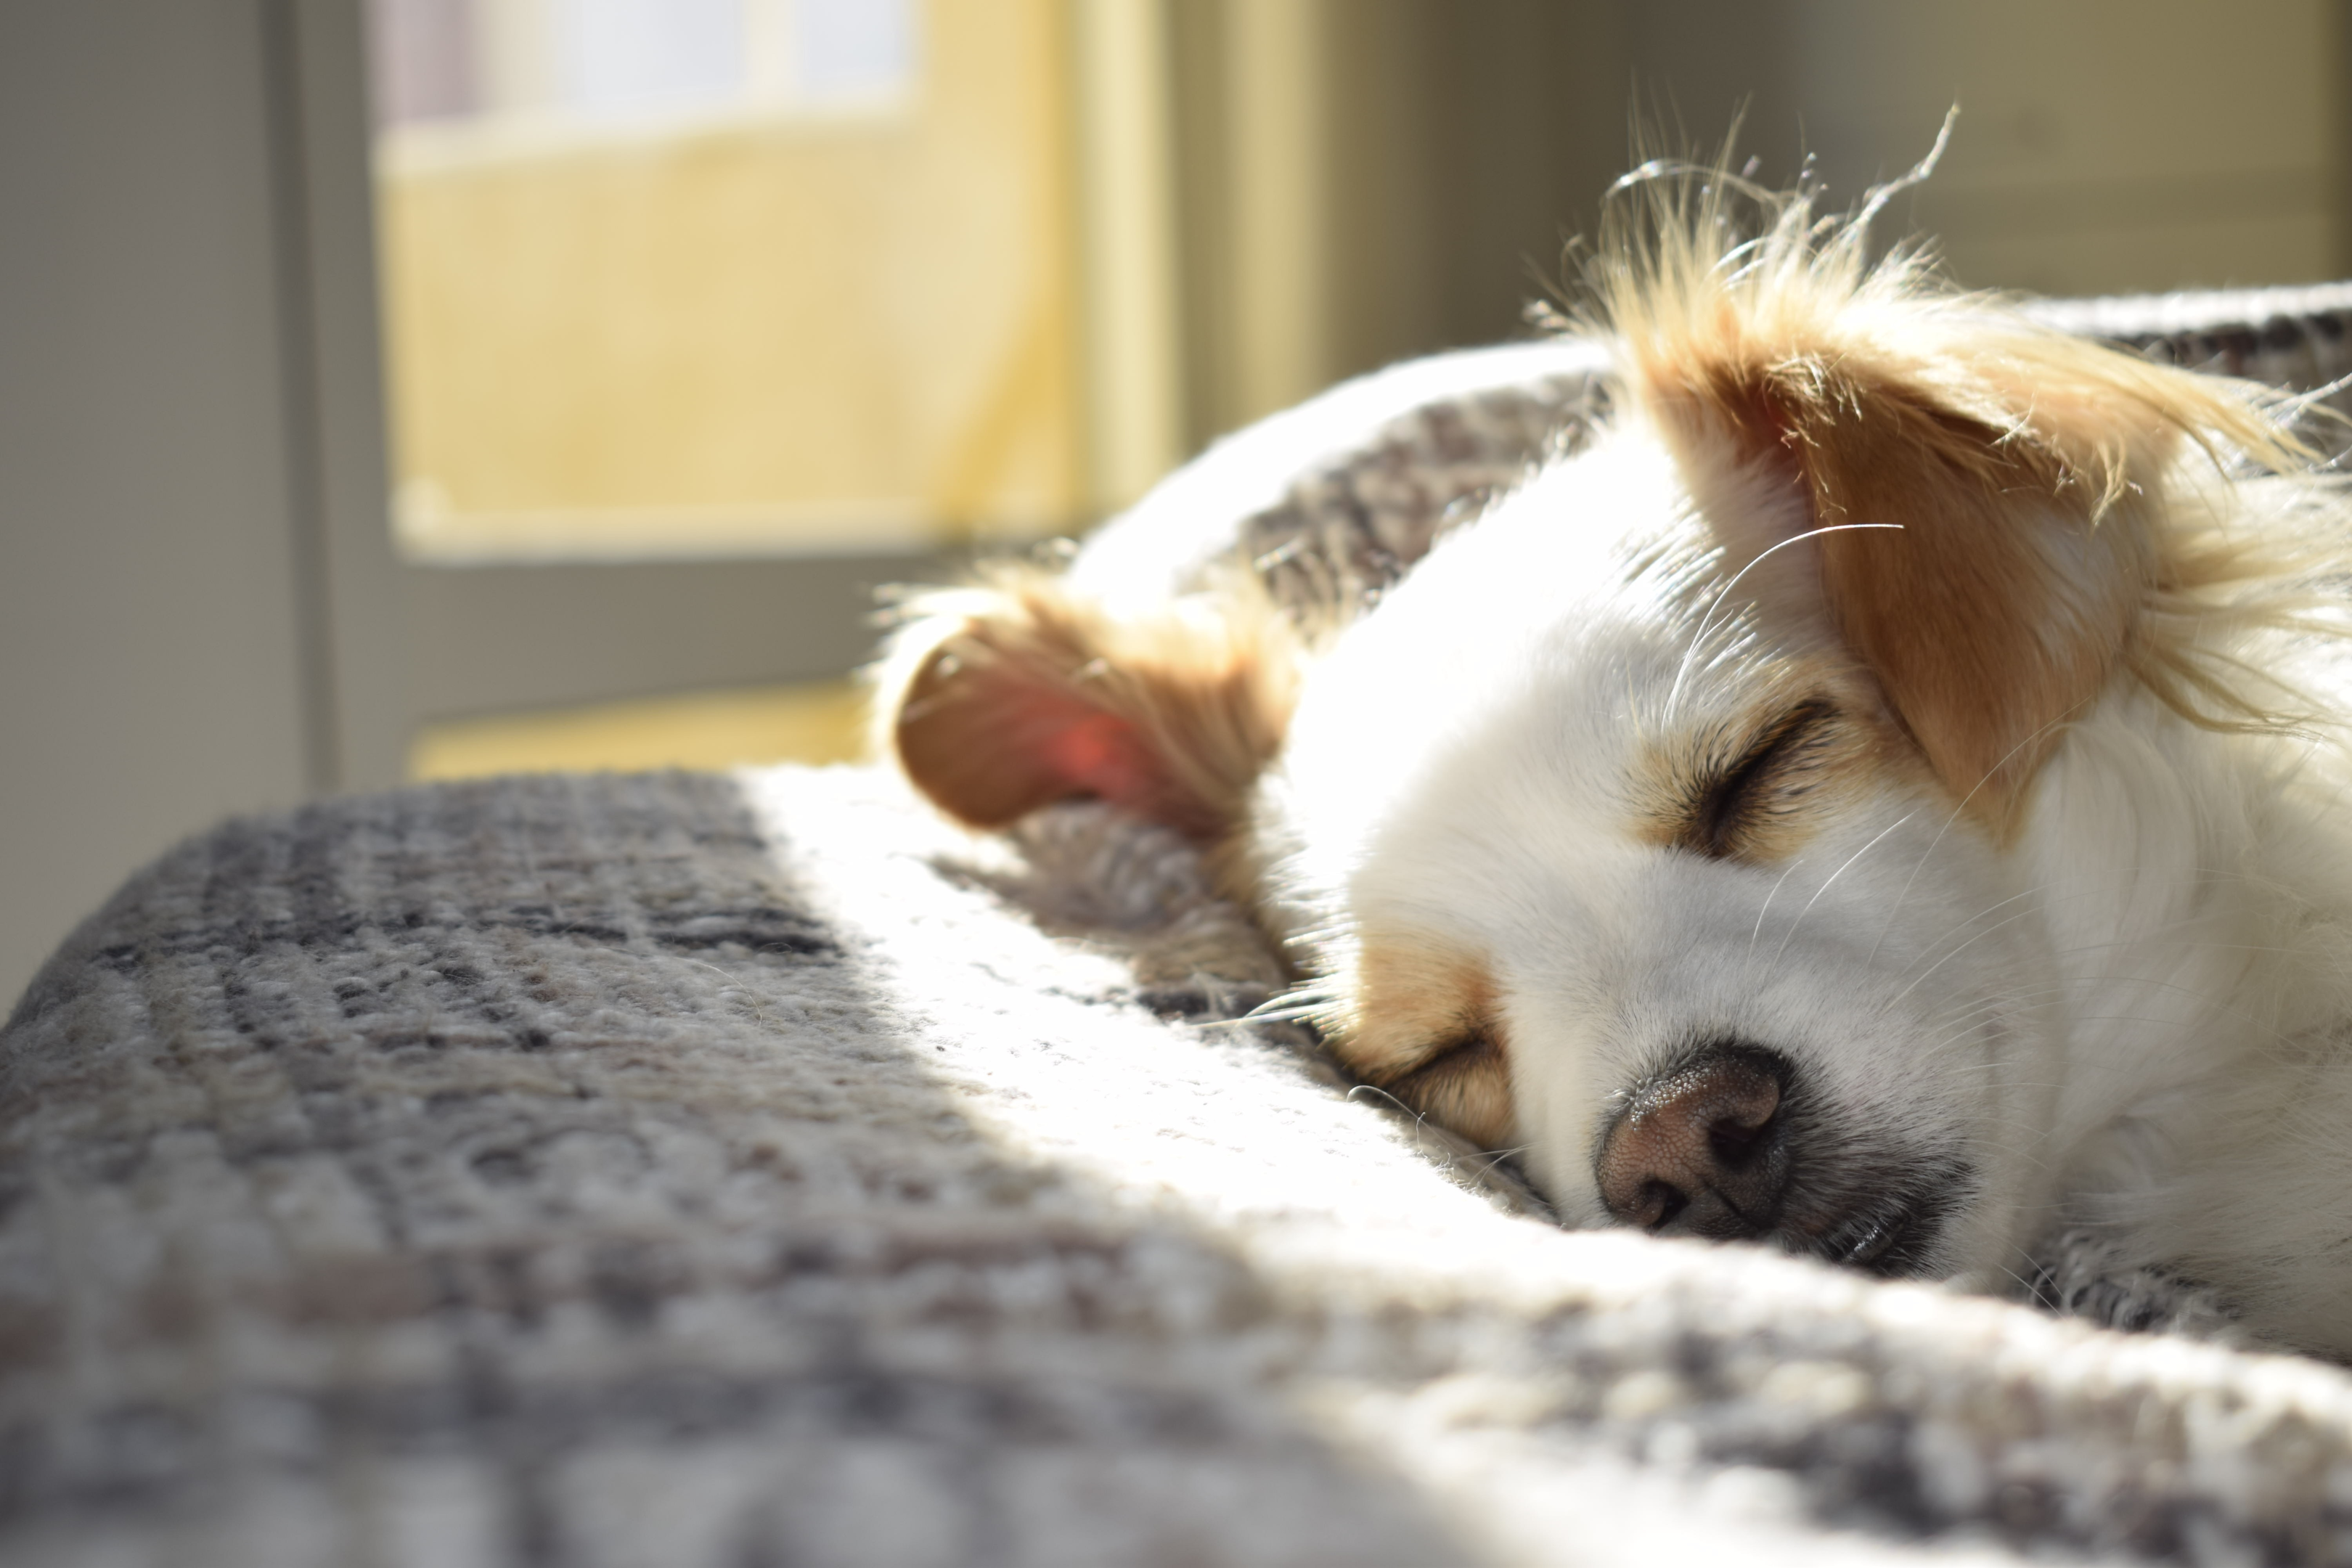 https://www.pexels.com/photo/closeup-photography-of-adult-short-coated-tan-and-white-dog-sleeping-on-gray-textile-at-daytime-731022/